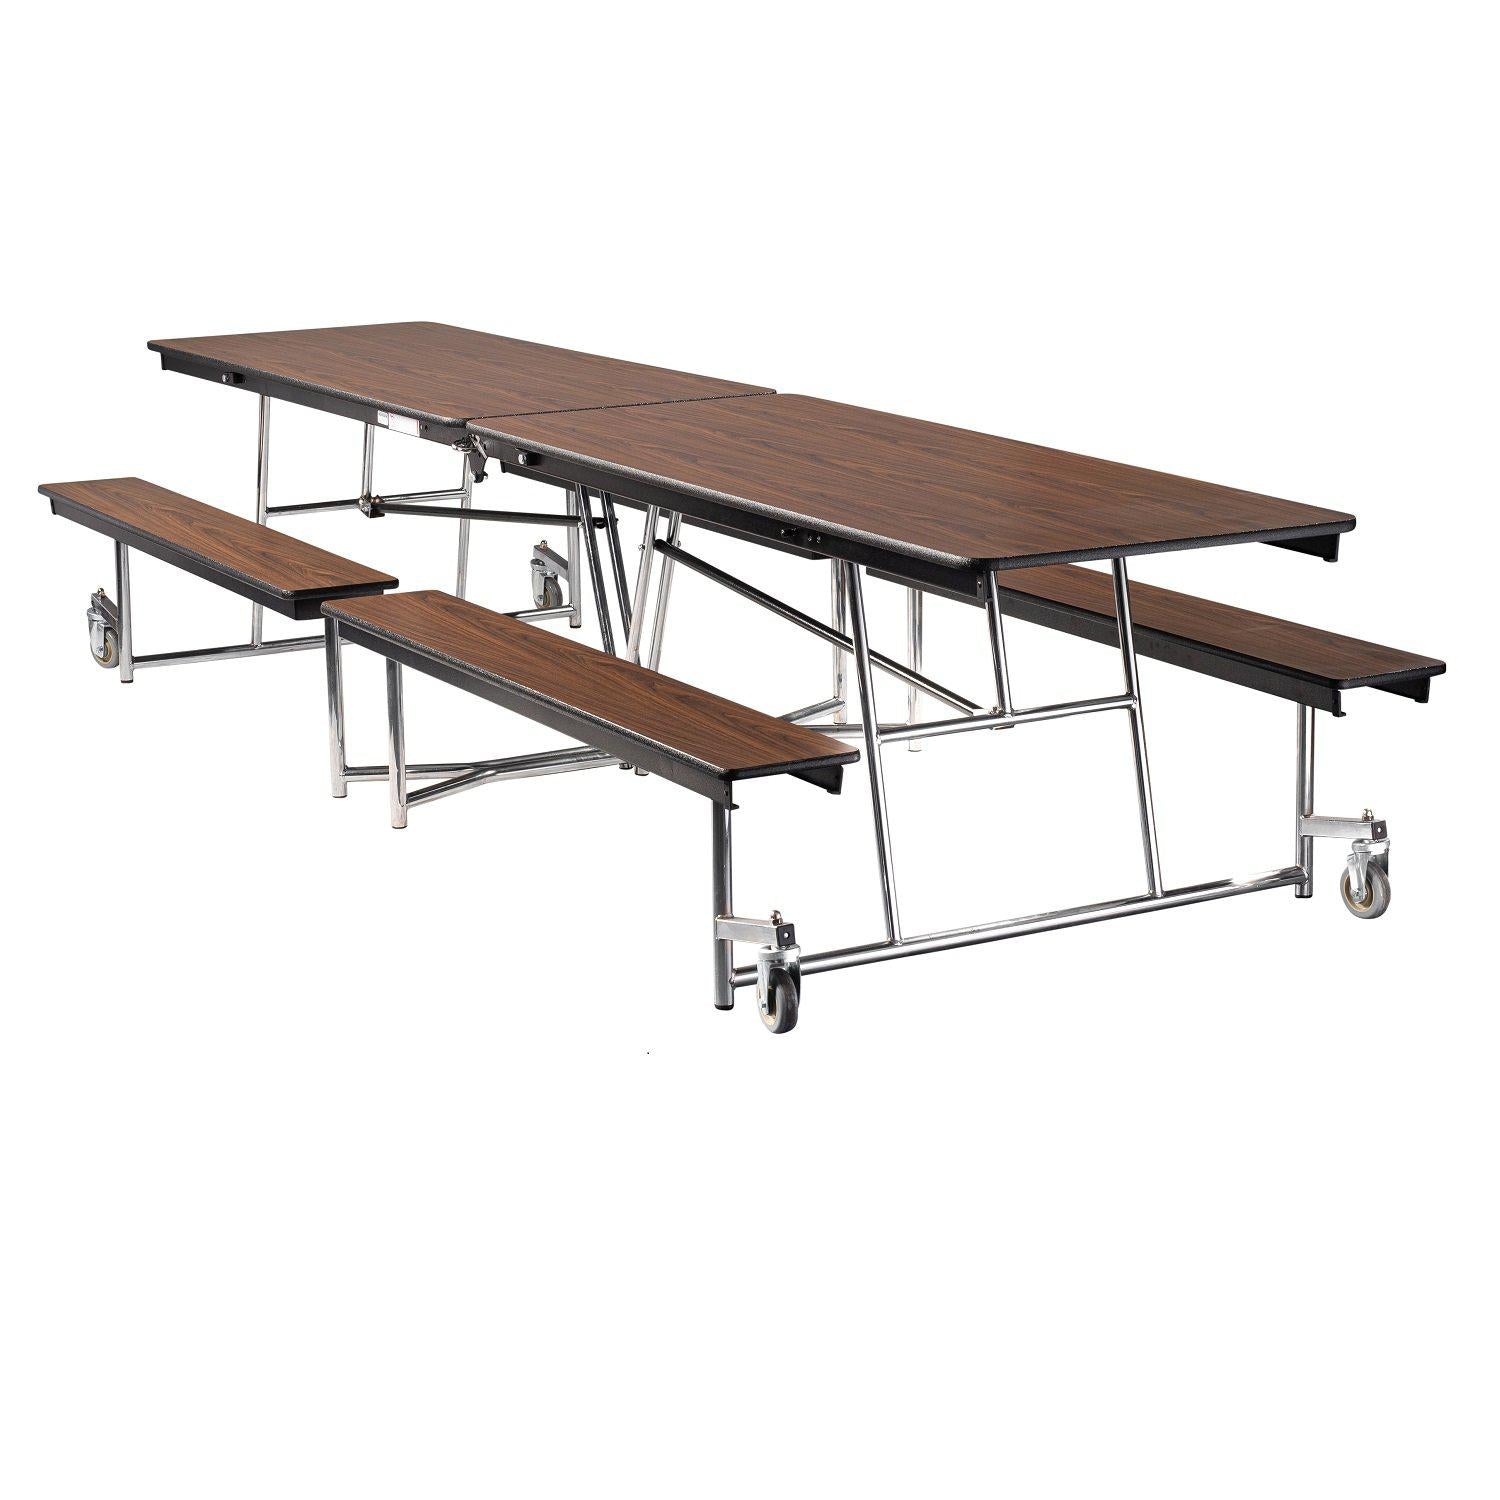 Mobile Cafeteria Table with Benches, 12'L, MDF Core, Black ProtectEdge, Chrome Frame